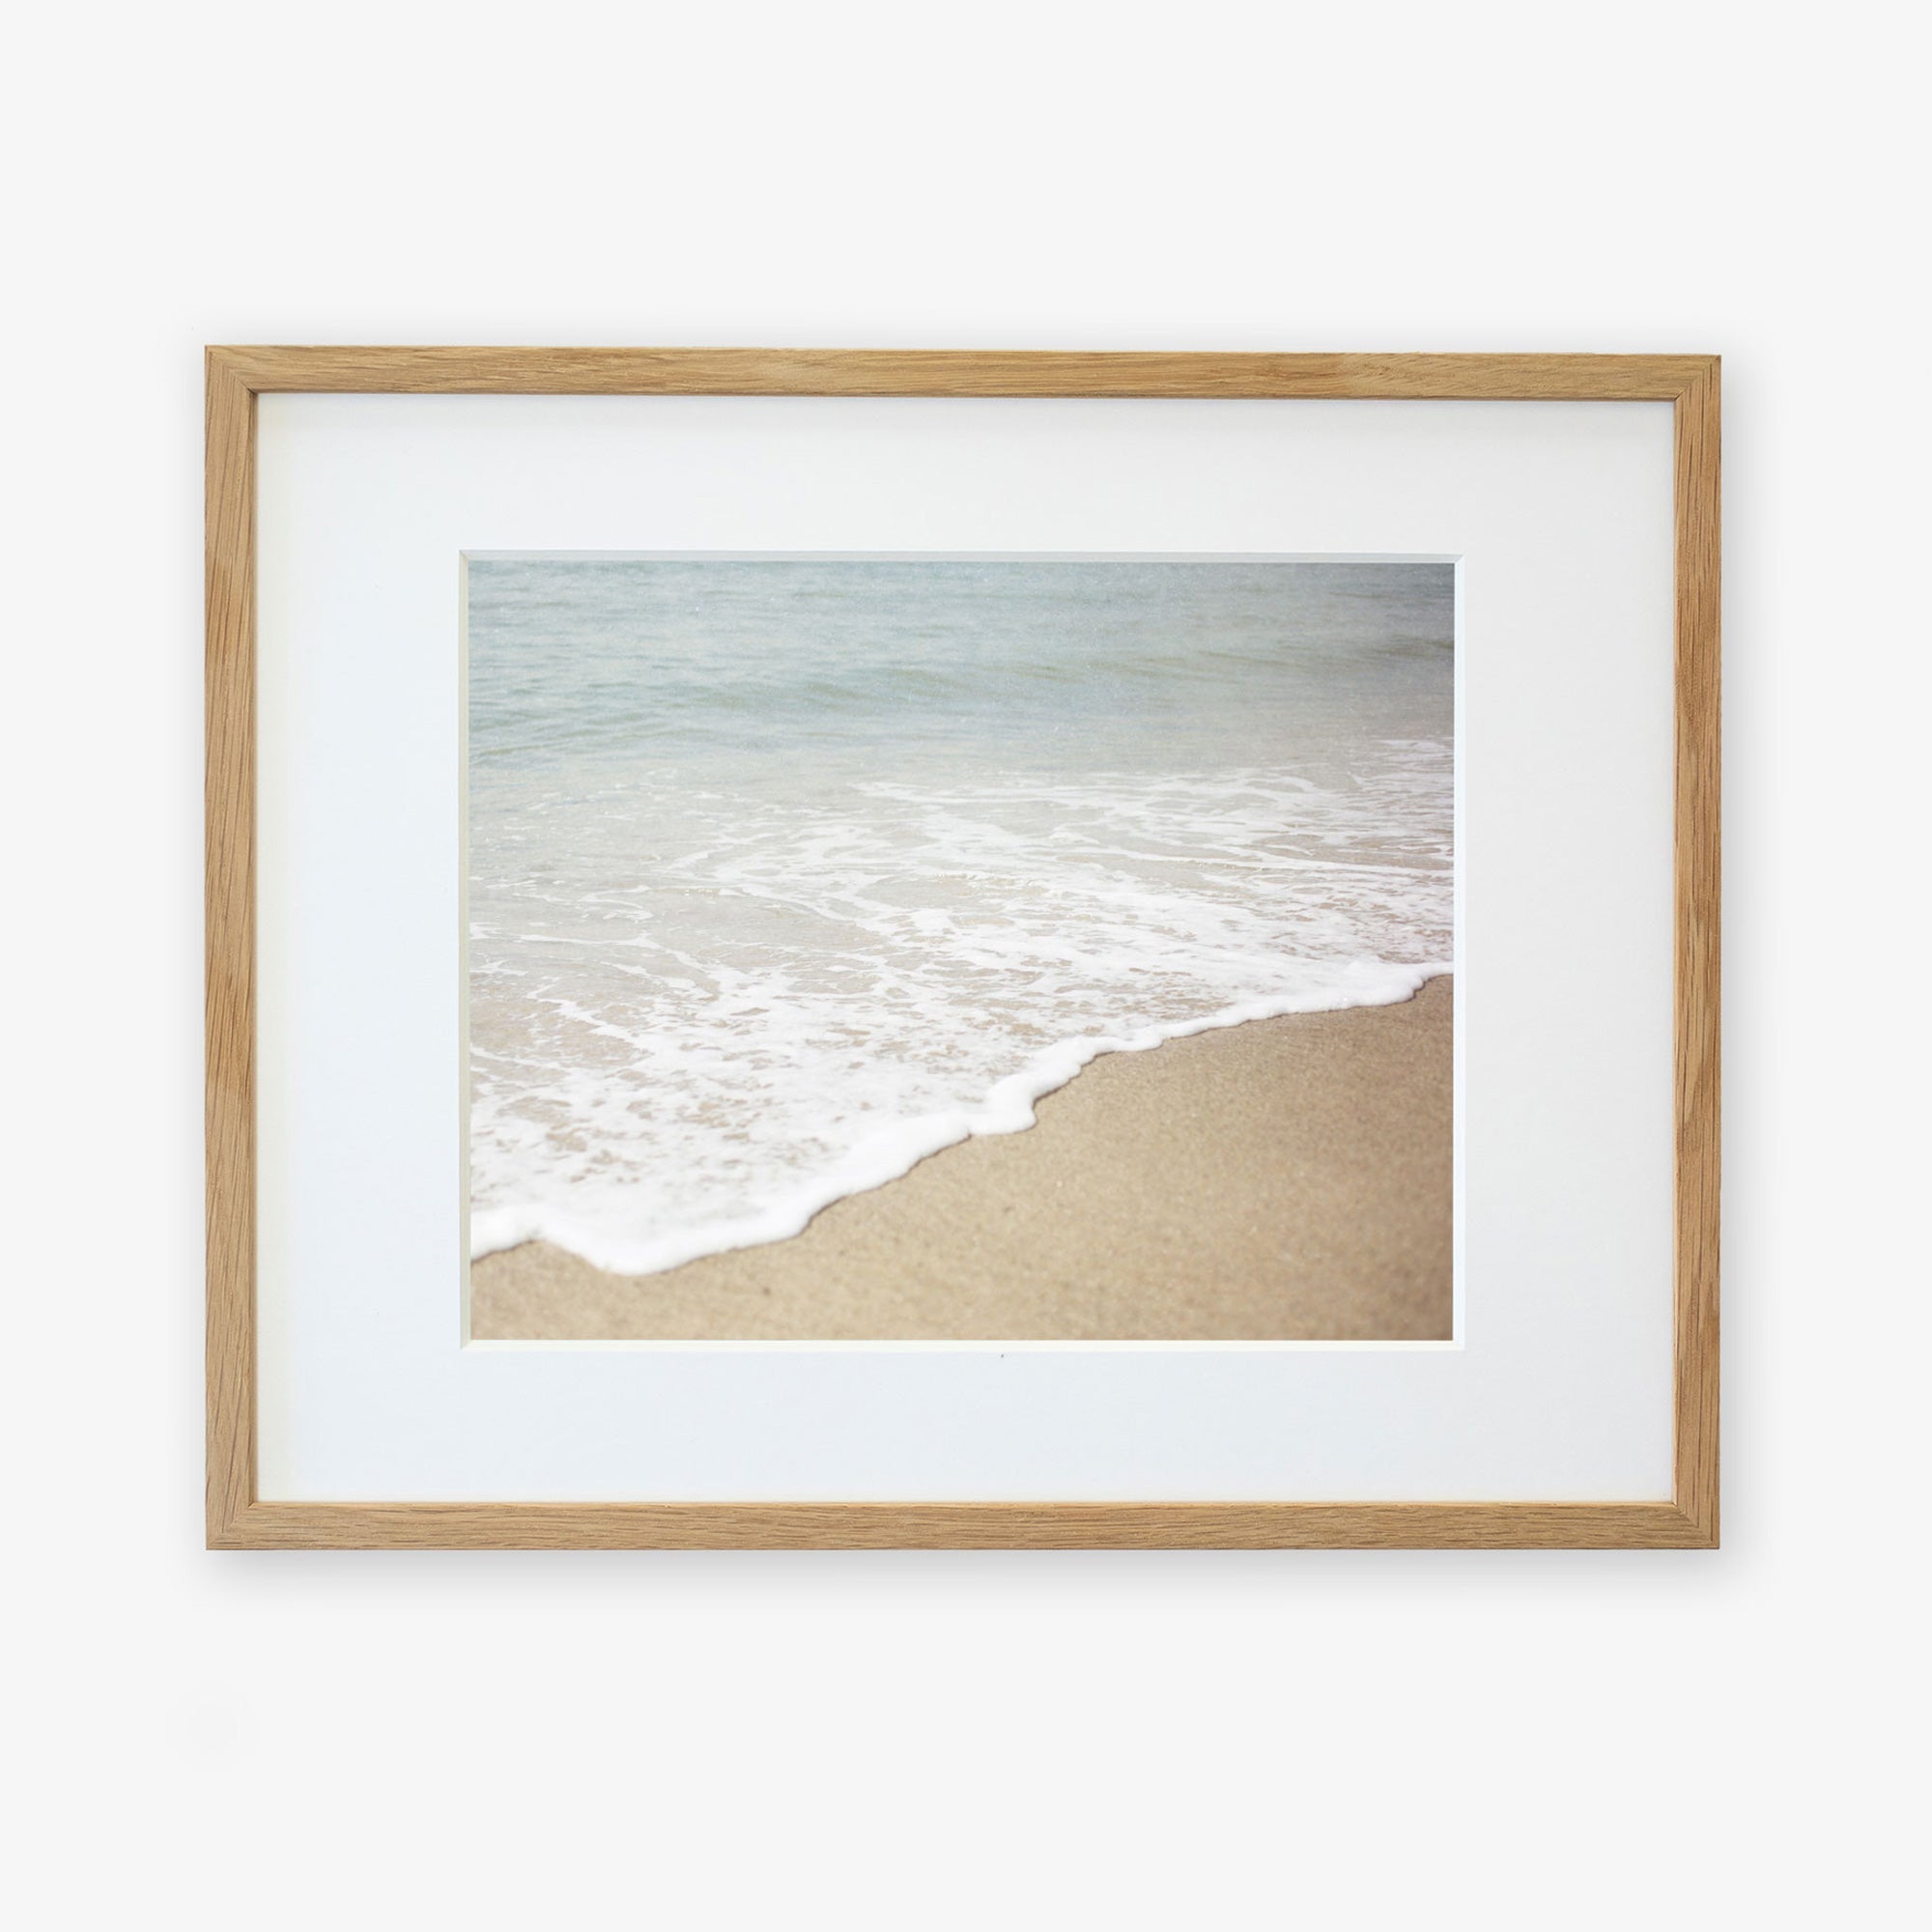 Framed photograph of a serene California beach scene showing Beach Waves Print, &#39;Chasing Surf&#39; printed on archival photographic paper and encased in a light wooden frame against a white background. Brand: Offley Green.